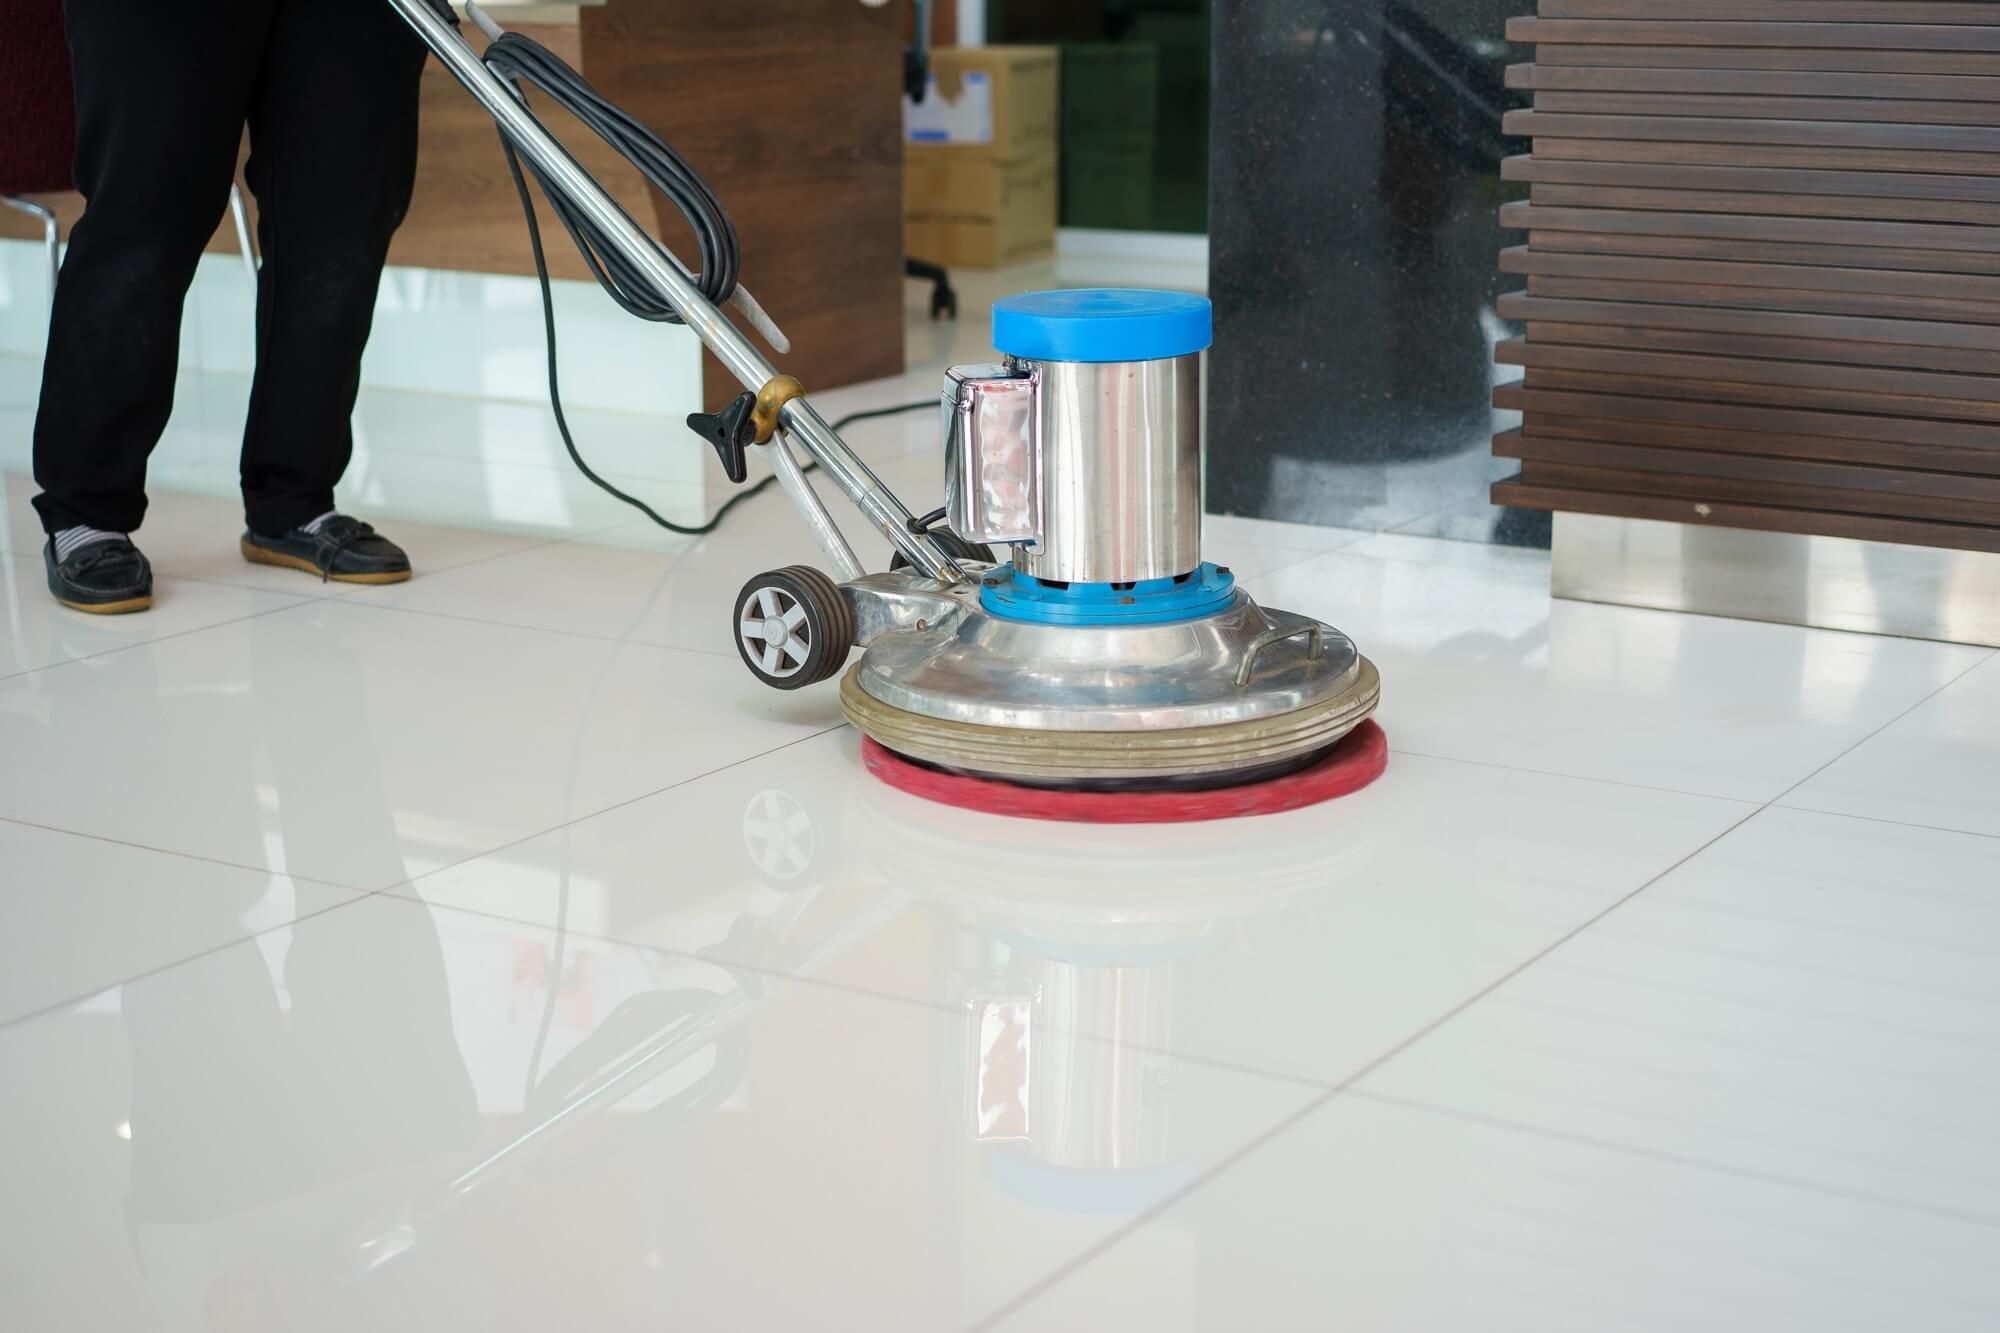 Can it be a tedious job to perform the service of tile and grout cleaning?